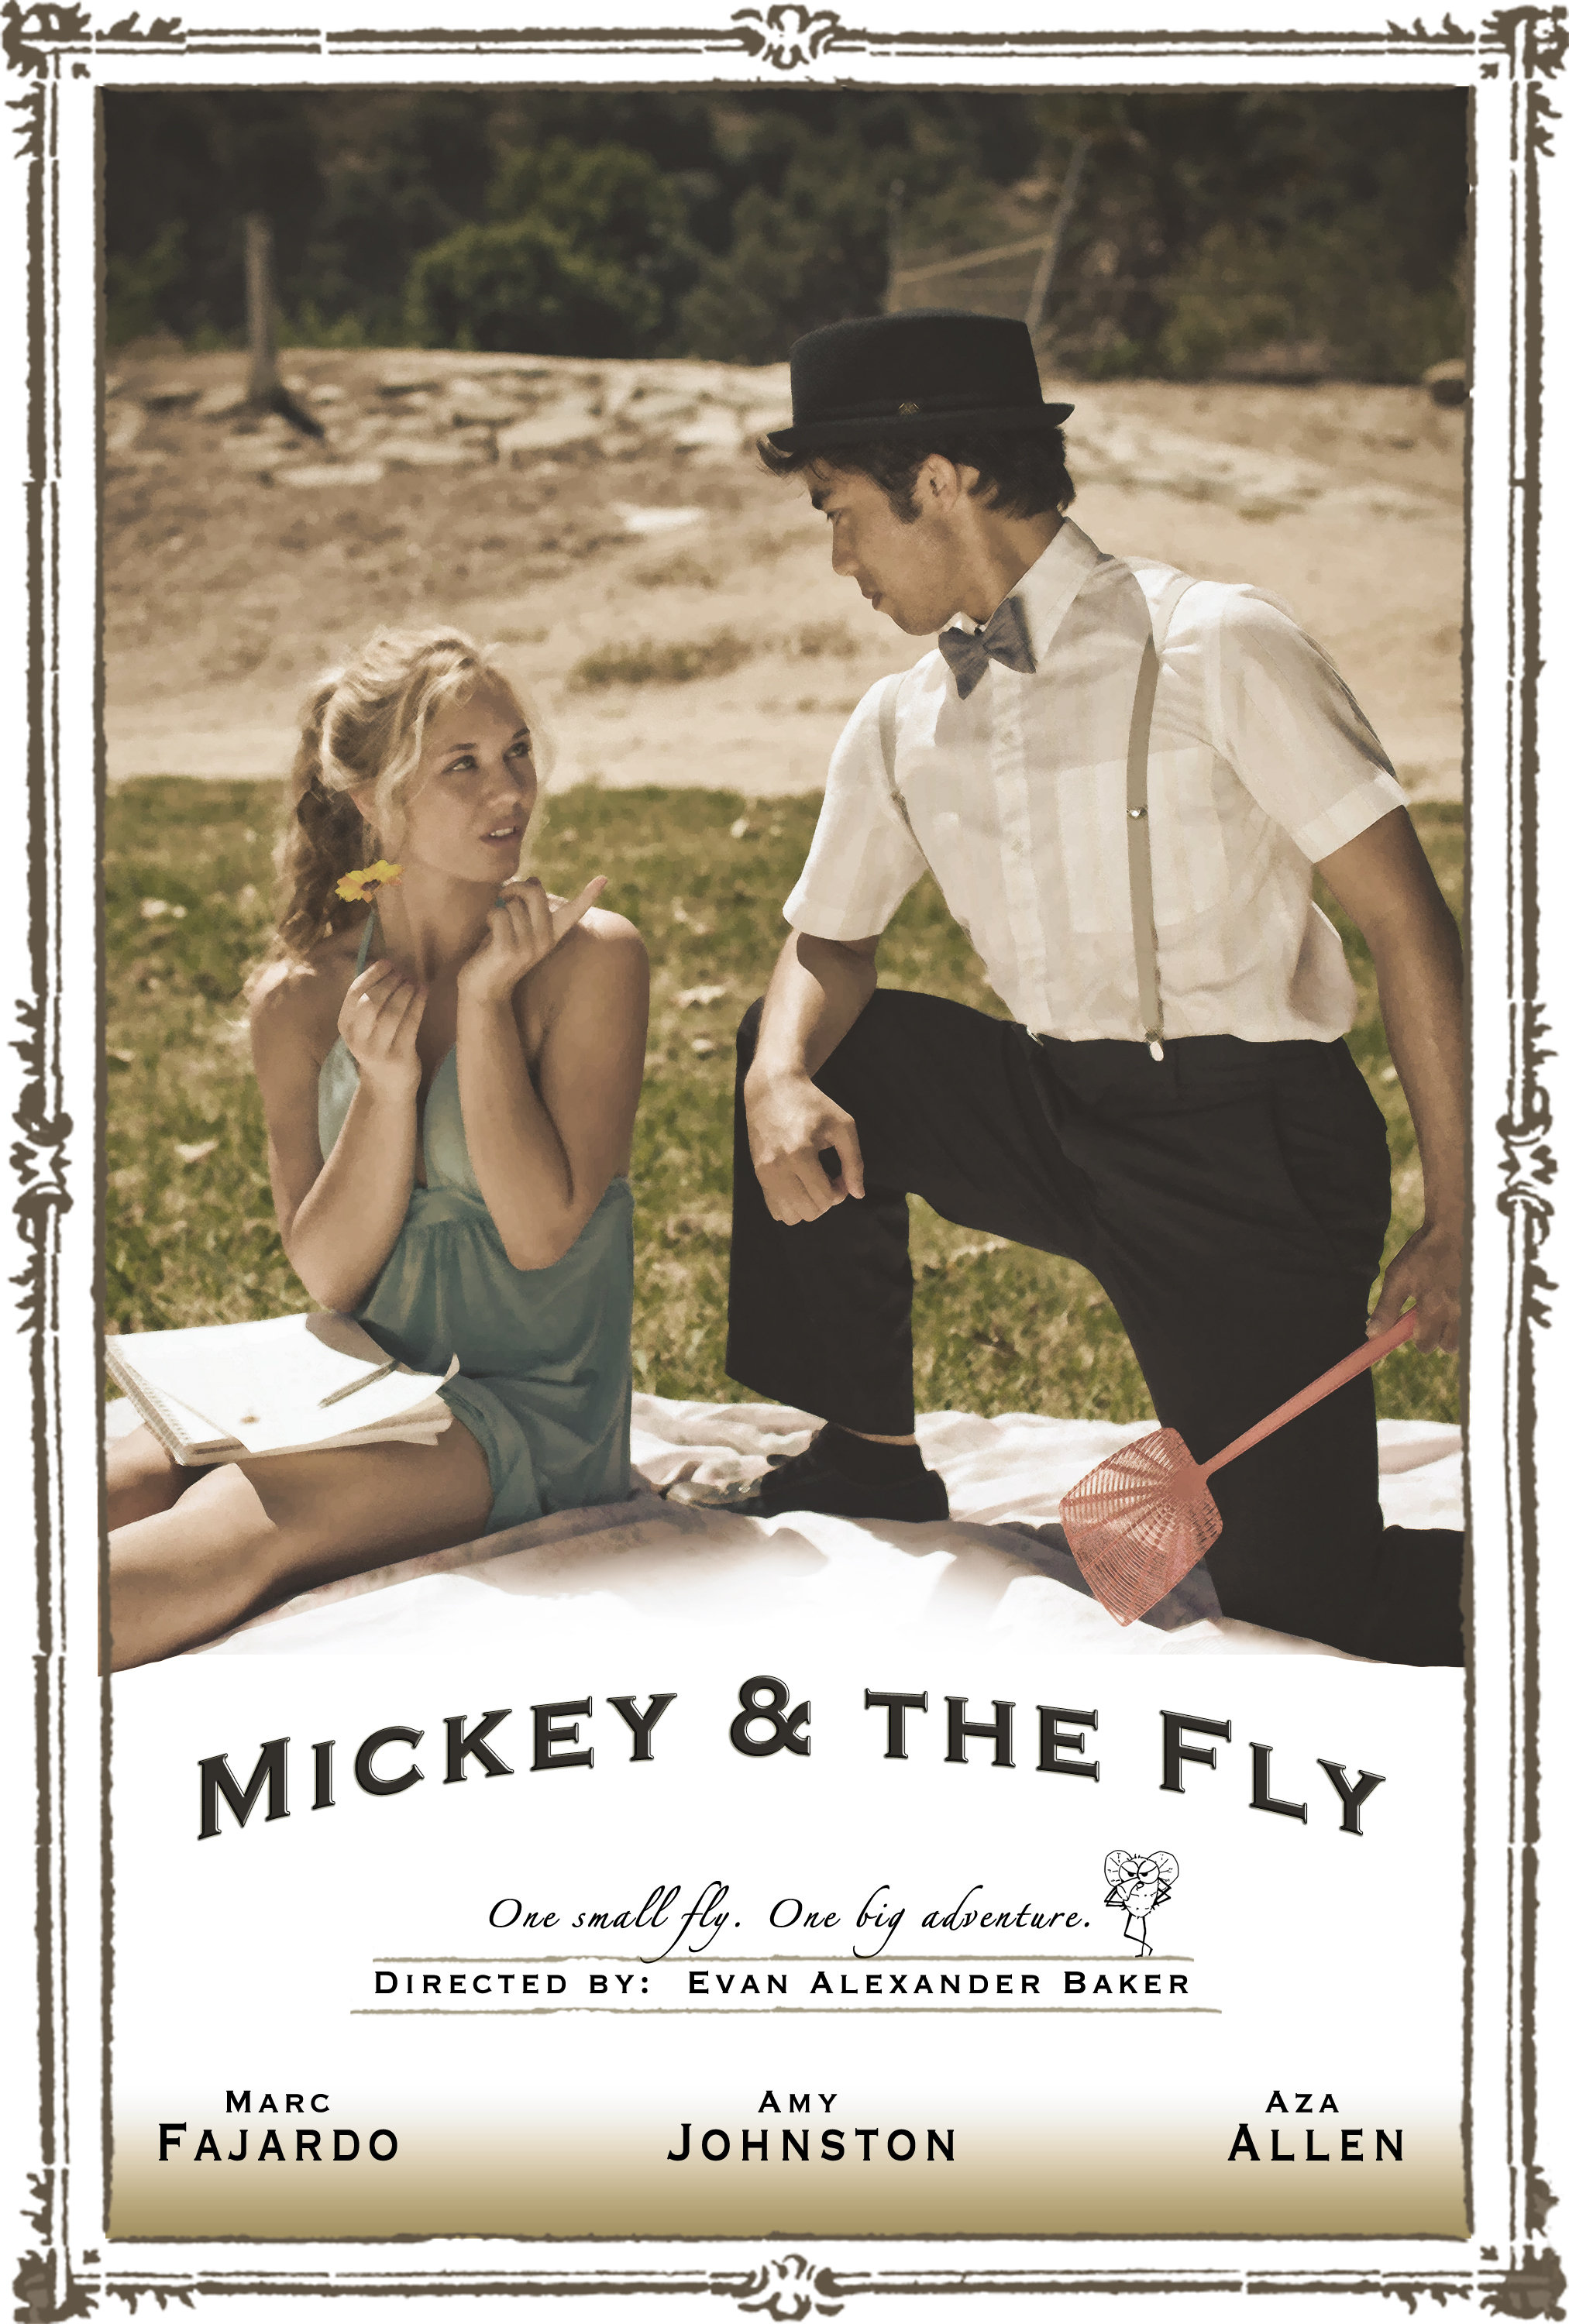 Mickey & the Fly; Design by: Dante Swain; Art by: Jerome Revilla; Photo by: Paul Huynh; Tag Line by: Josh Halloway